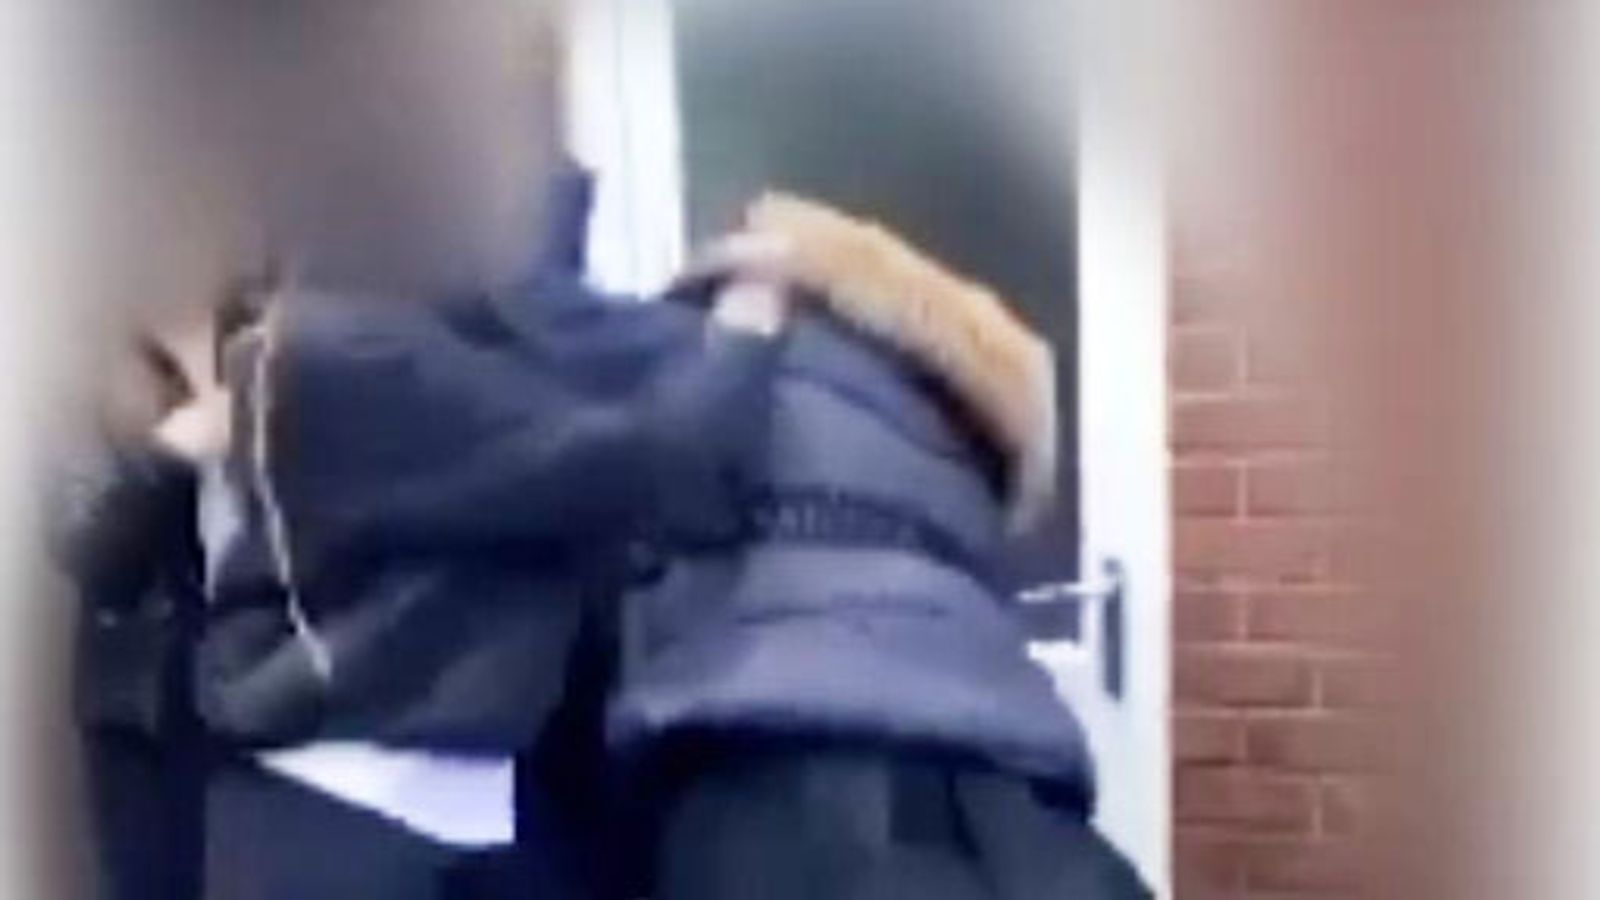 'A child is going to lose their life': Sickening trend of children filming attacks on other kids